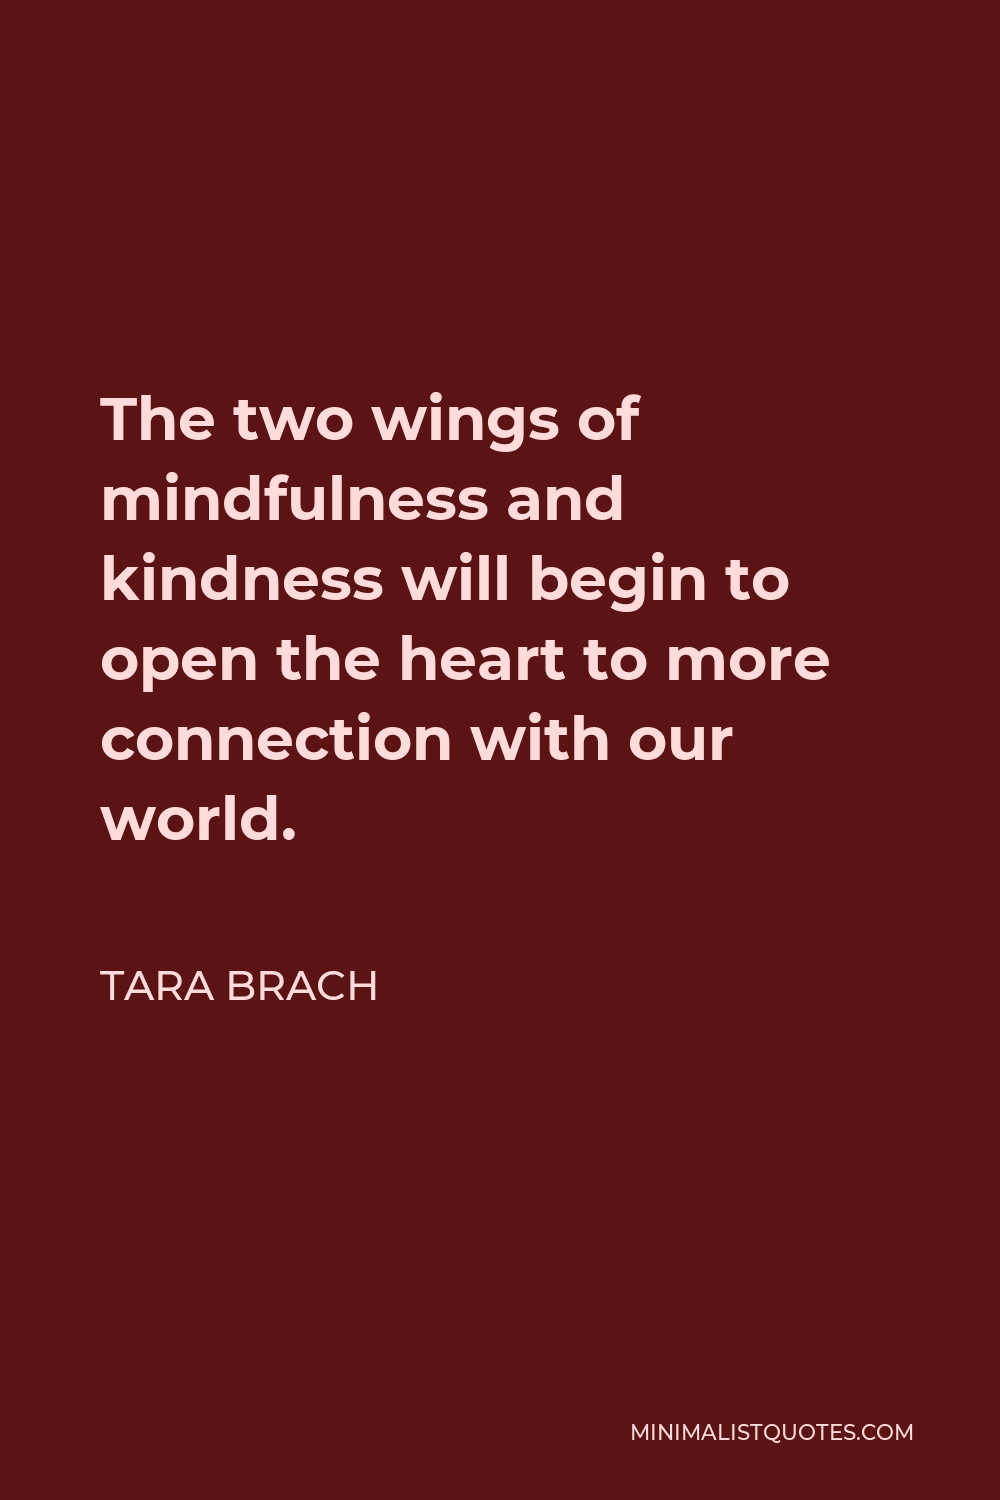 Tara Brach Quote - The two wings of mindfulness and kindness will begin to open the heart to more connection with our world.